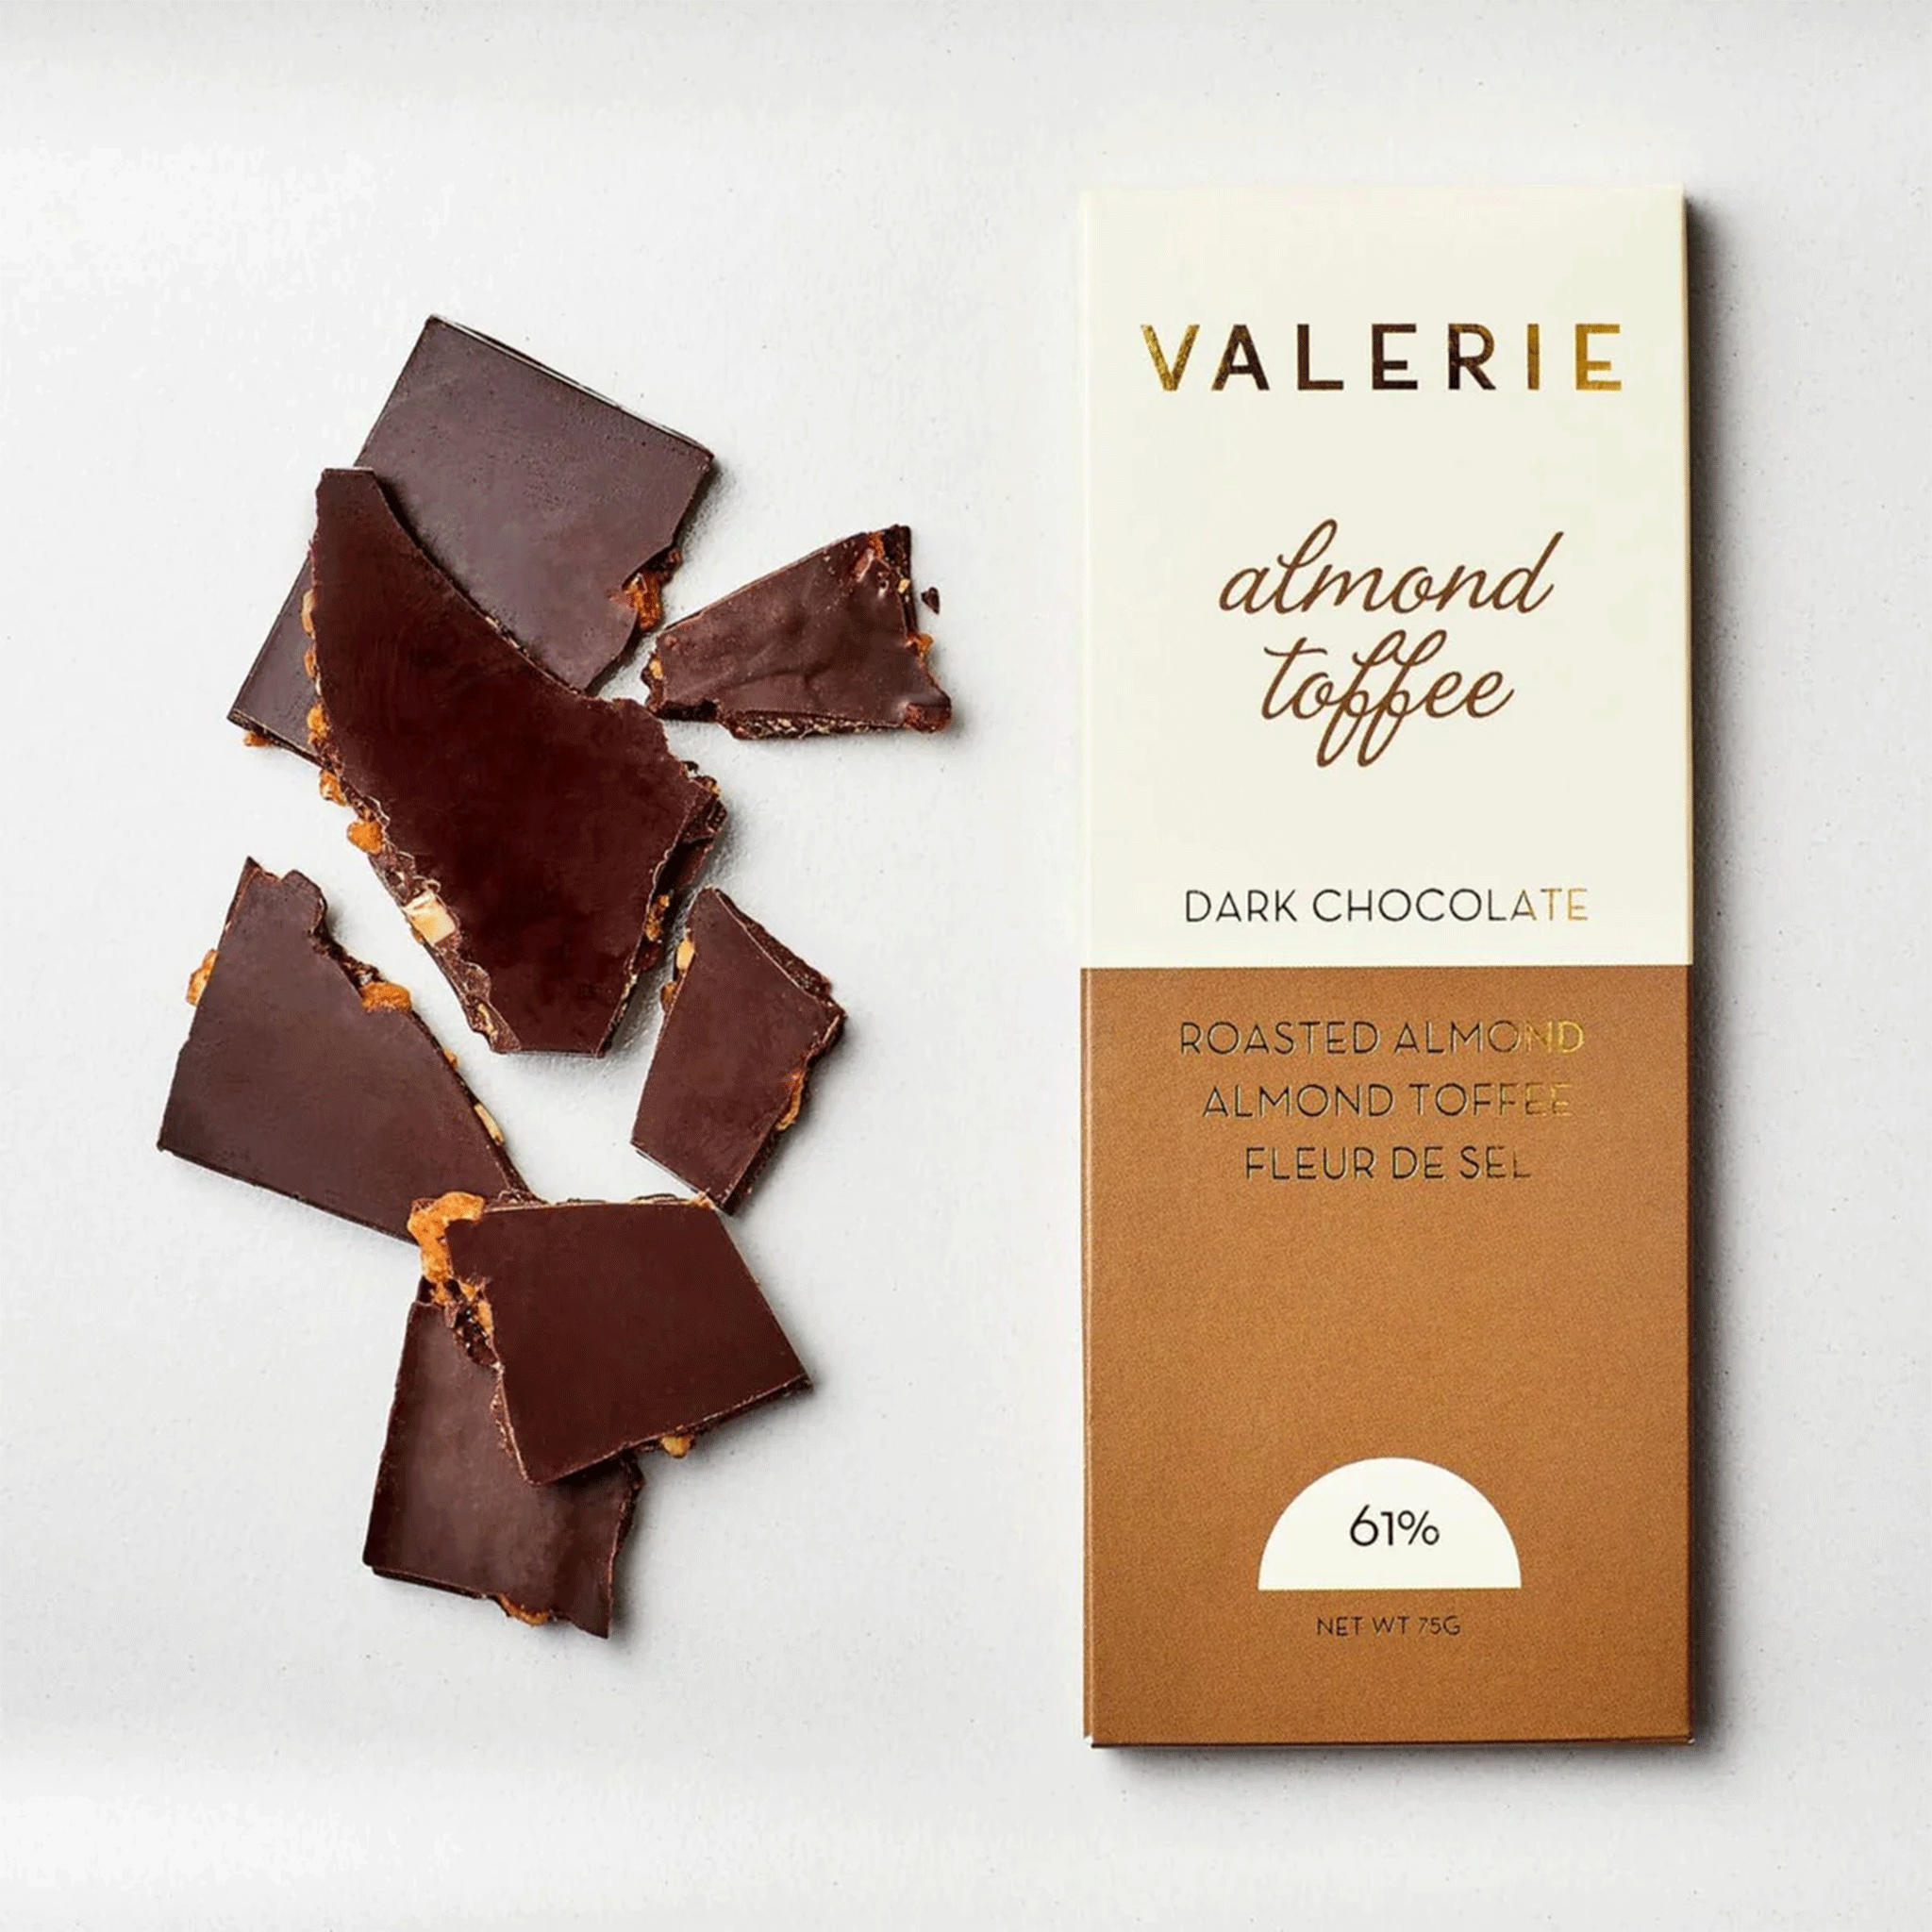 On a white background is a chocolate bar with tan and ivory packaging along with gold foil text that reads, &quot;Valerie almond toffee Dark Chocolate Roasted Almond Almond Toffee Fleur De Sel&quot;.